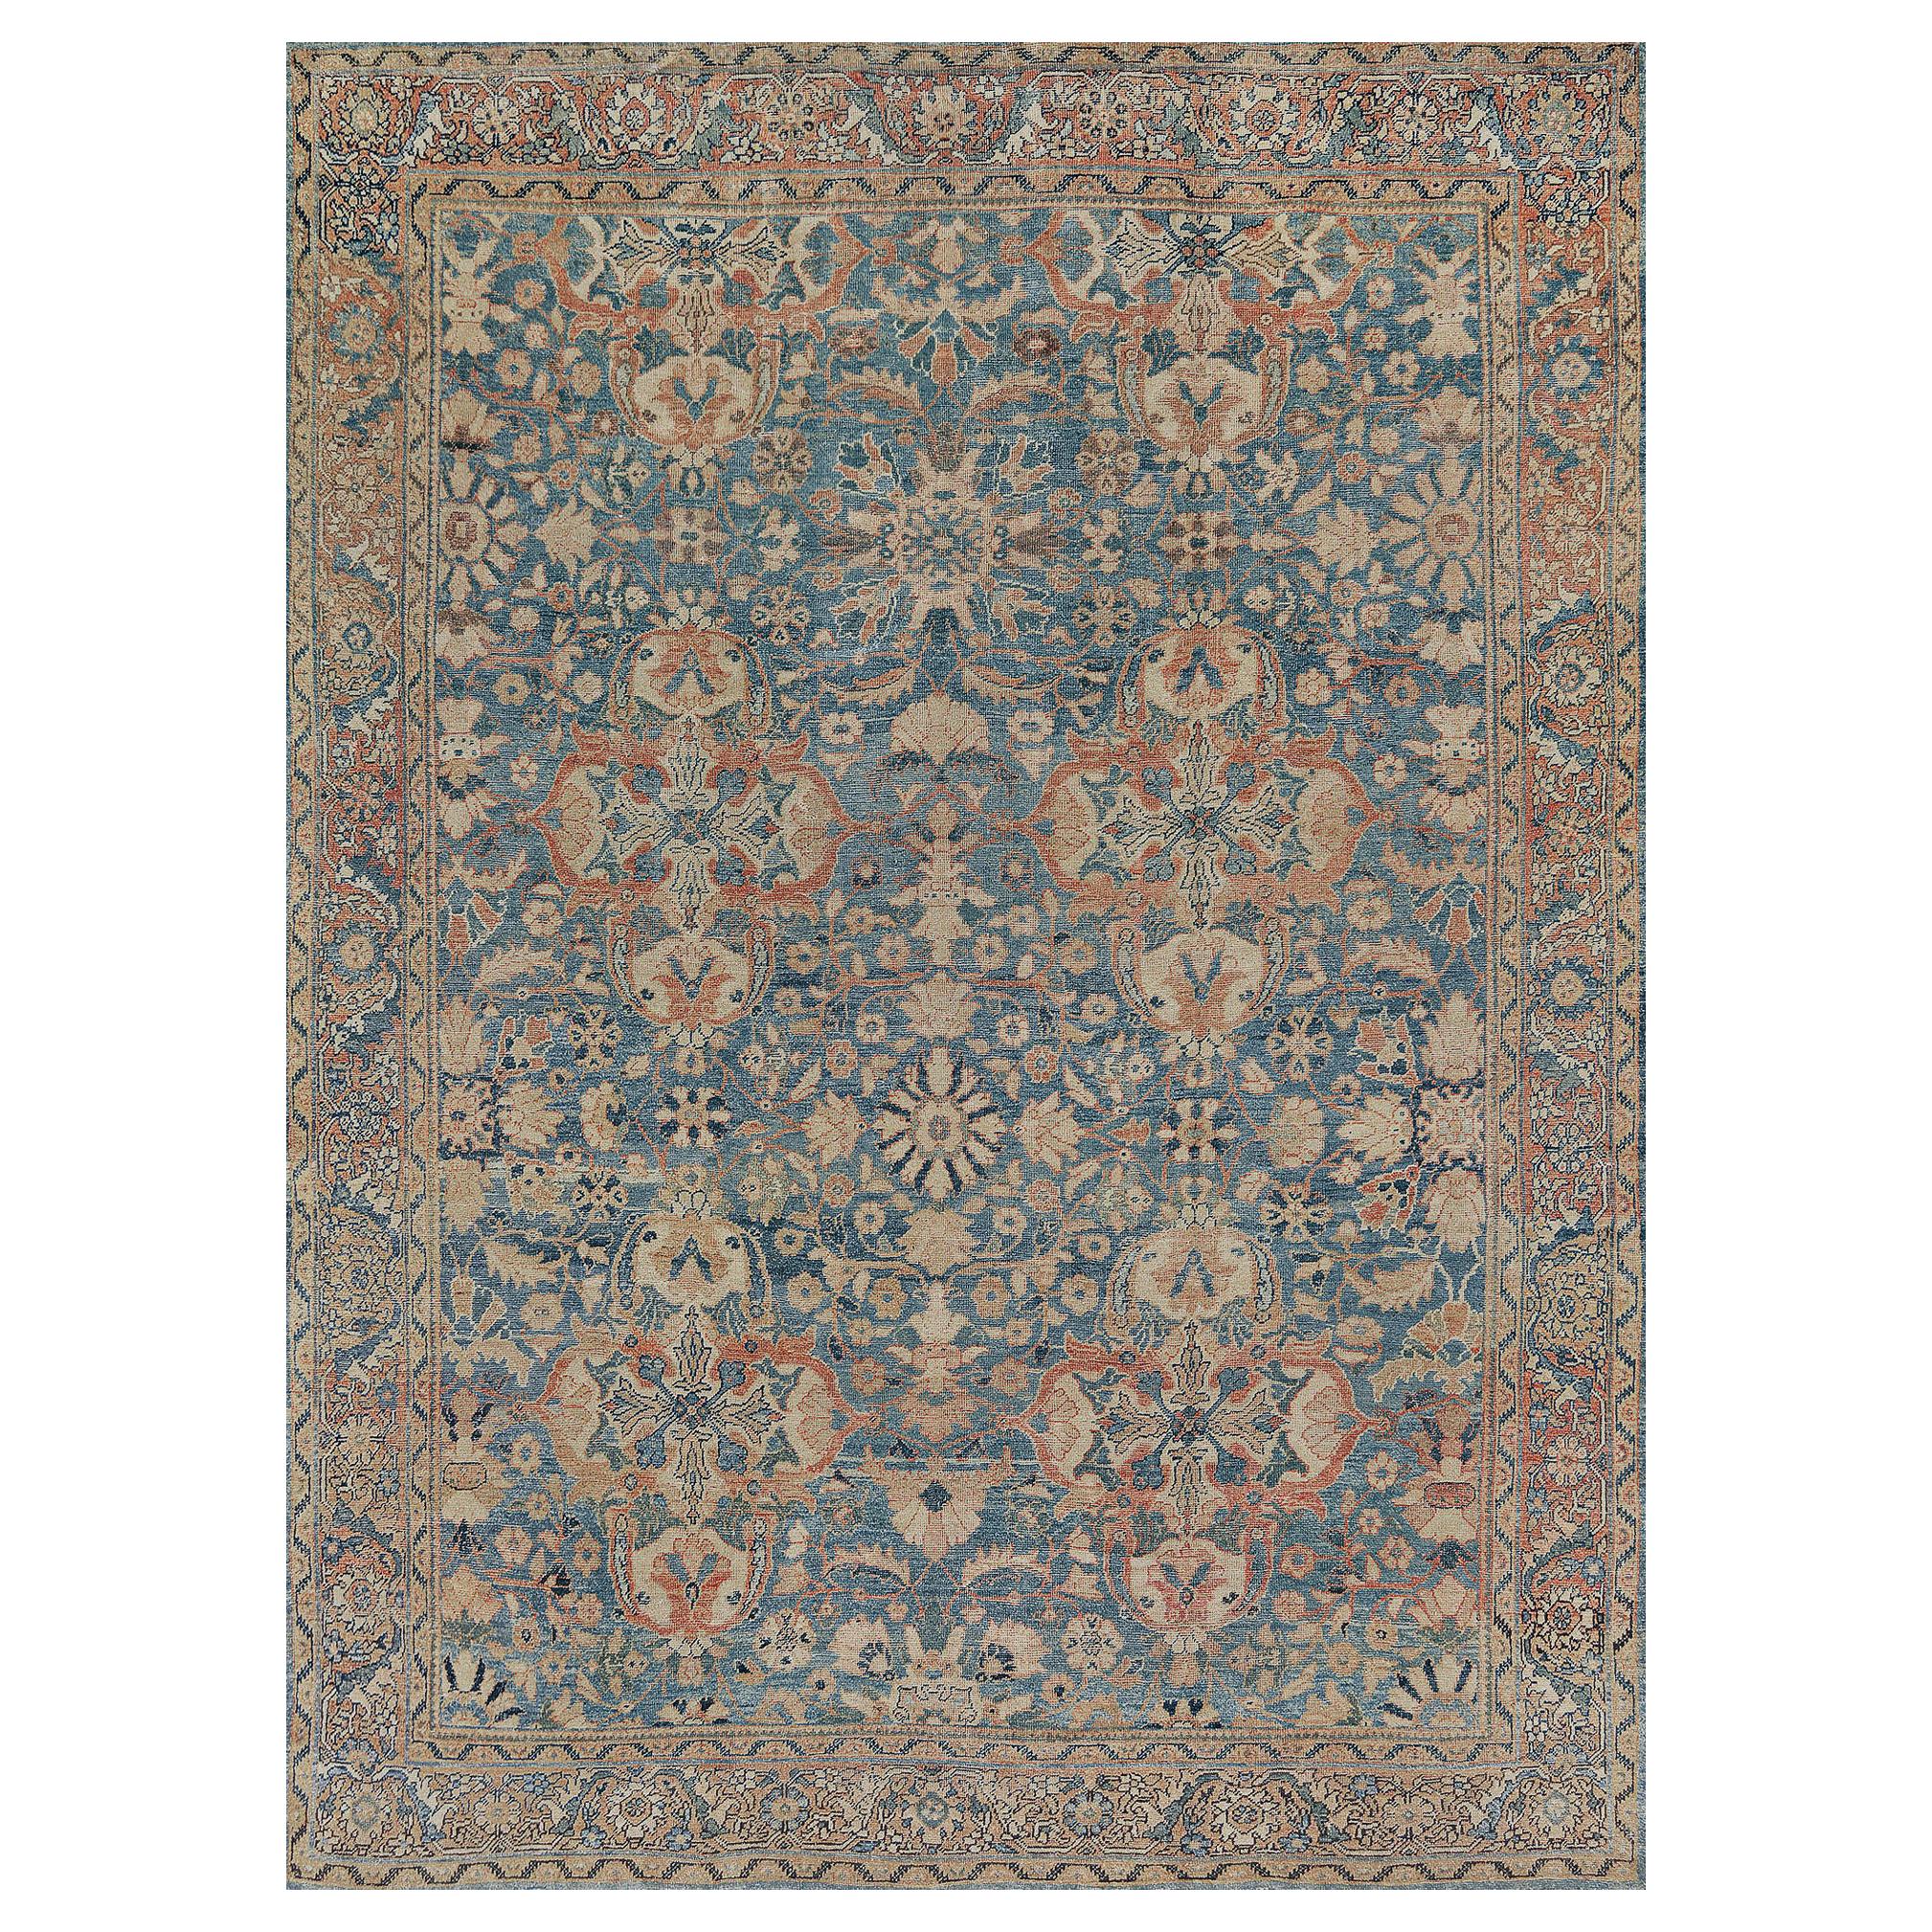 Late 19th Century Authentic Handwoven Persian Sultanabad Wool Rug